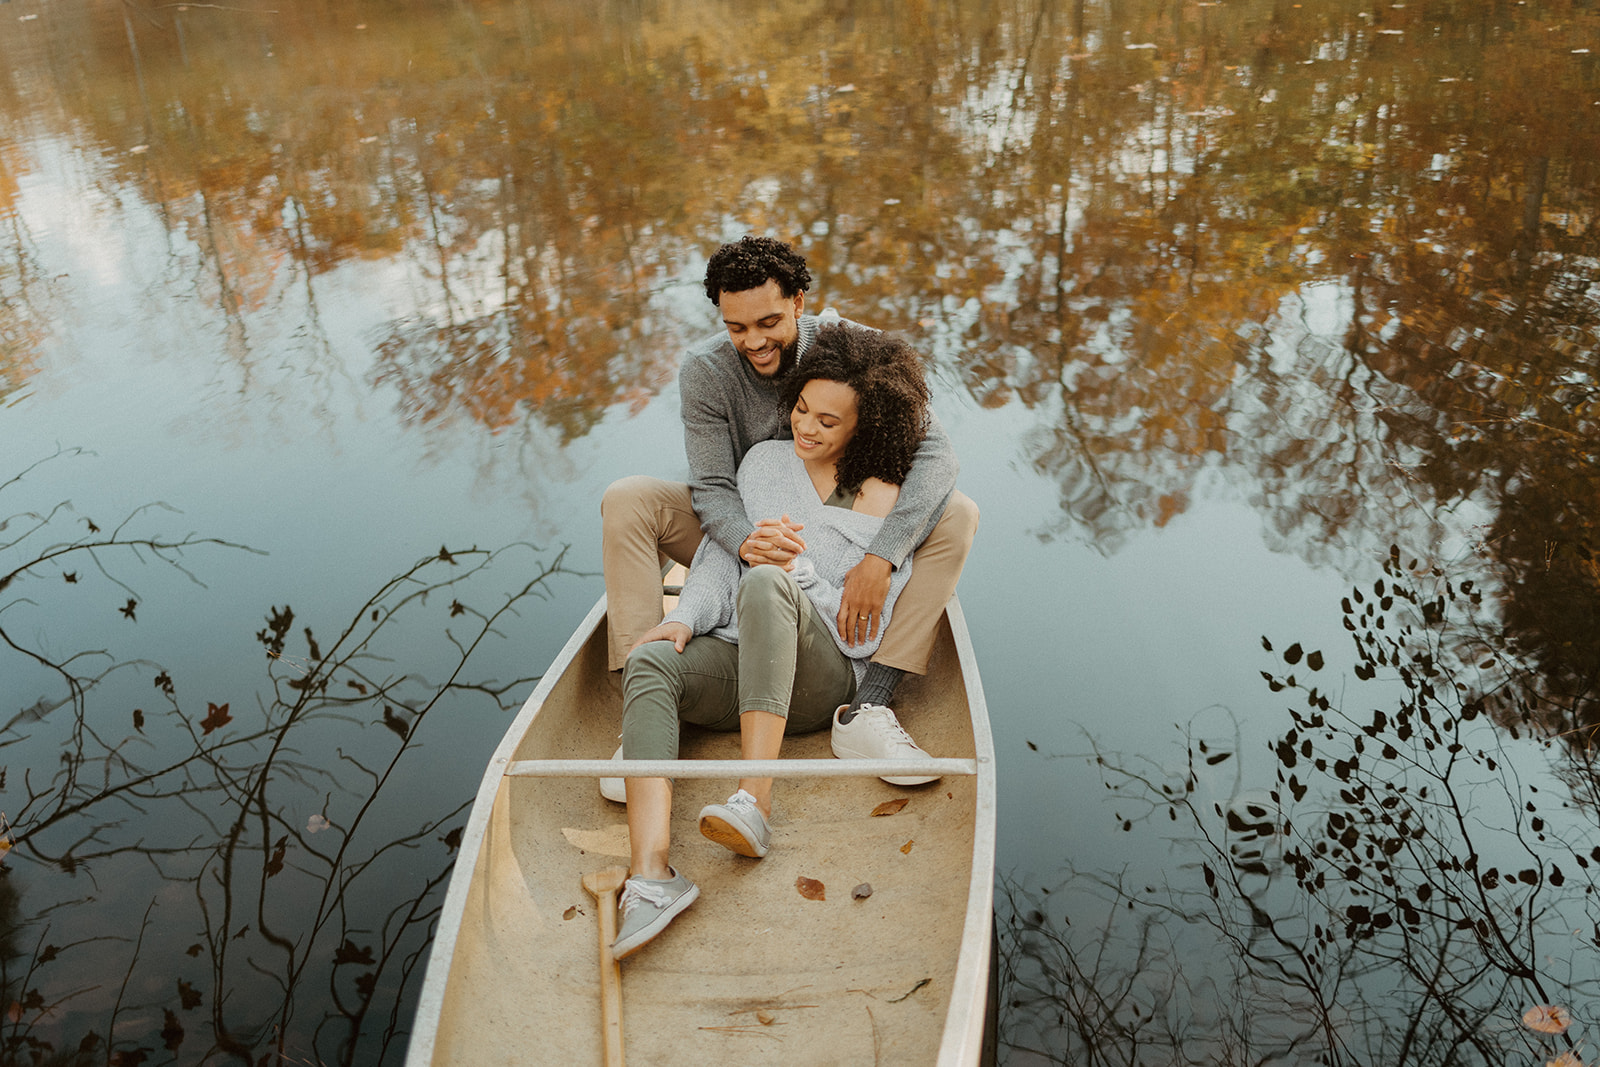 the couple in the canoe together during their couple photoshoot